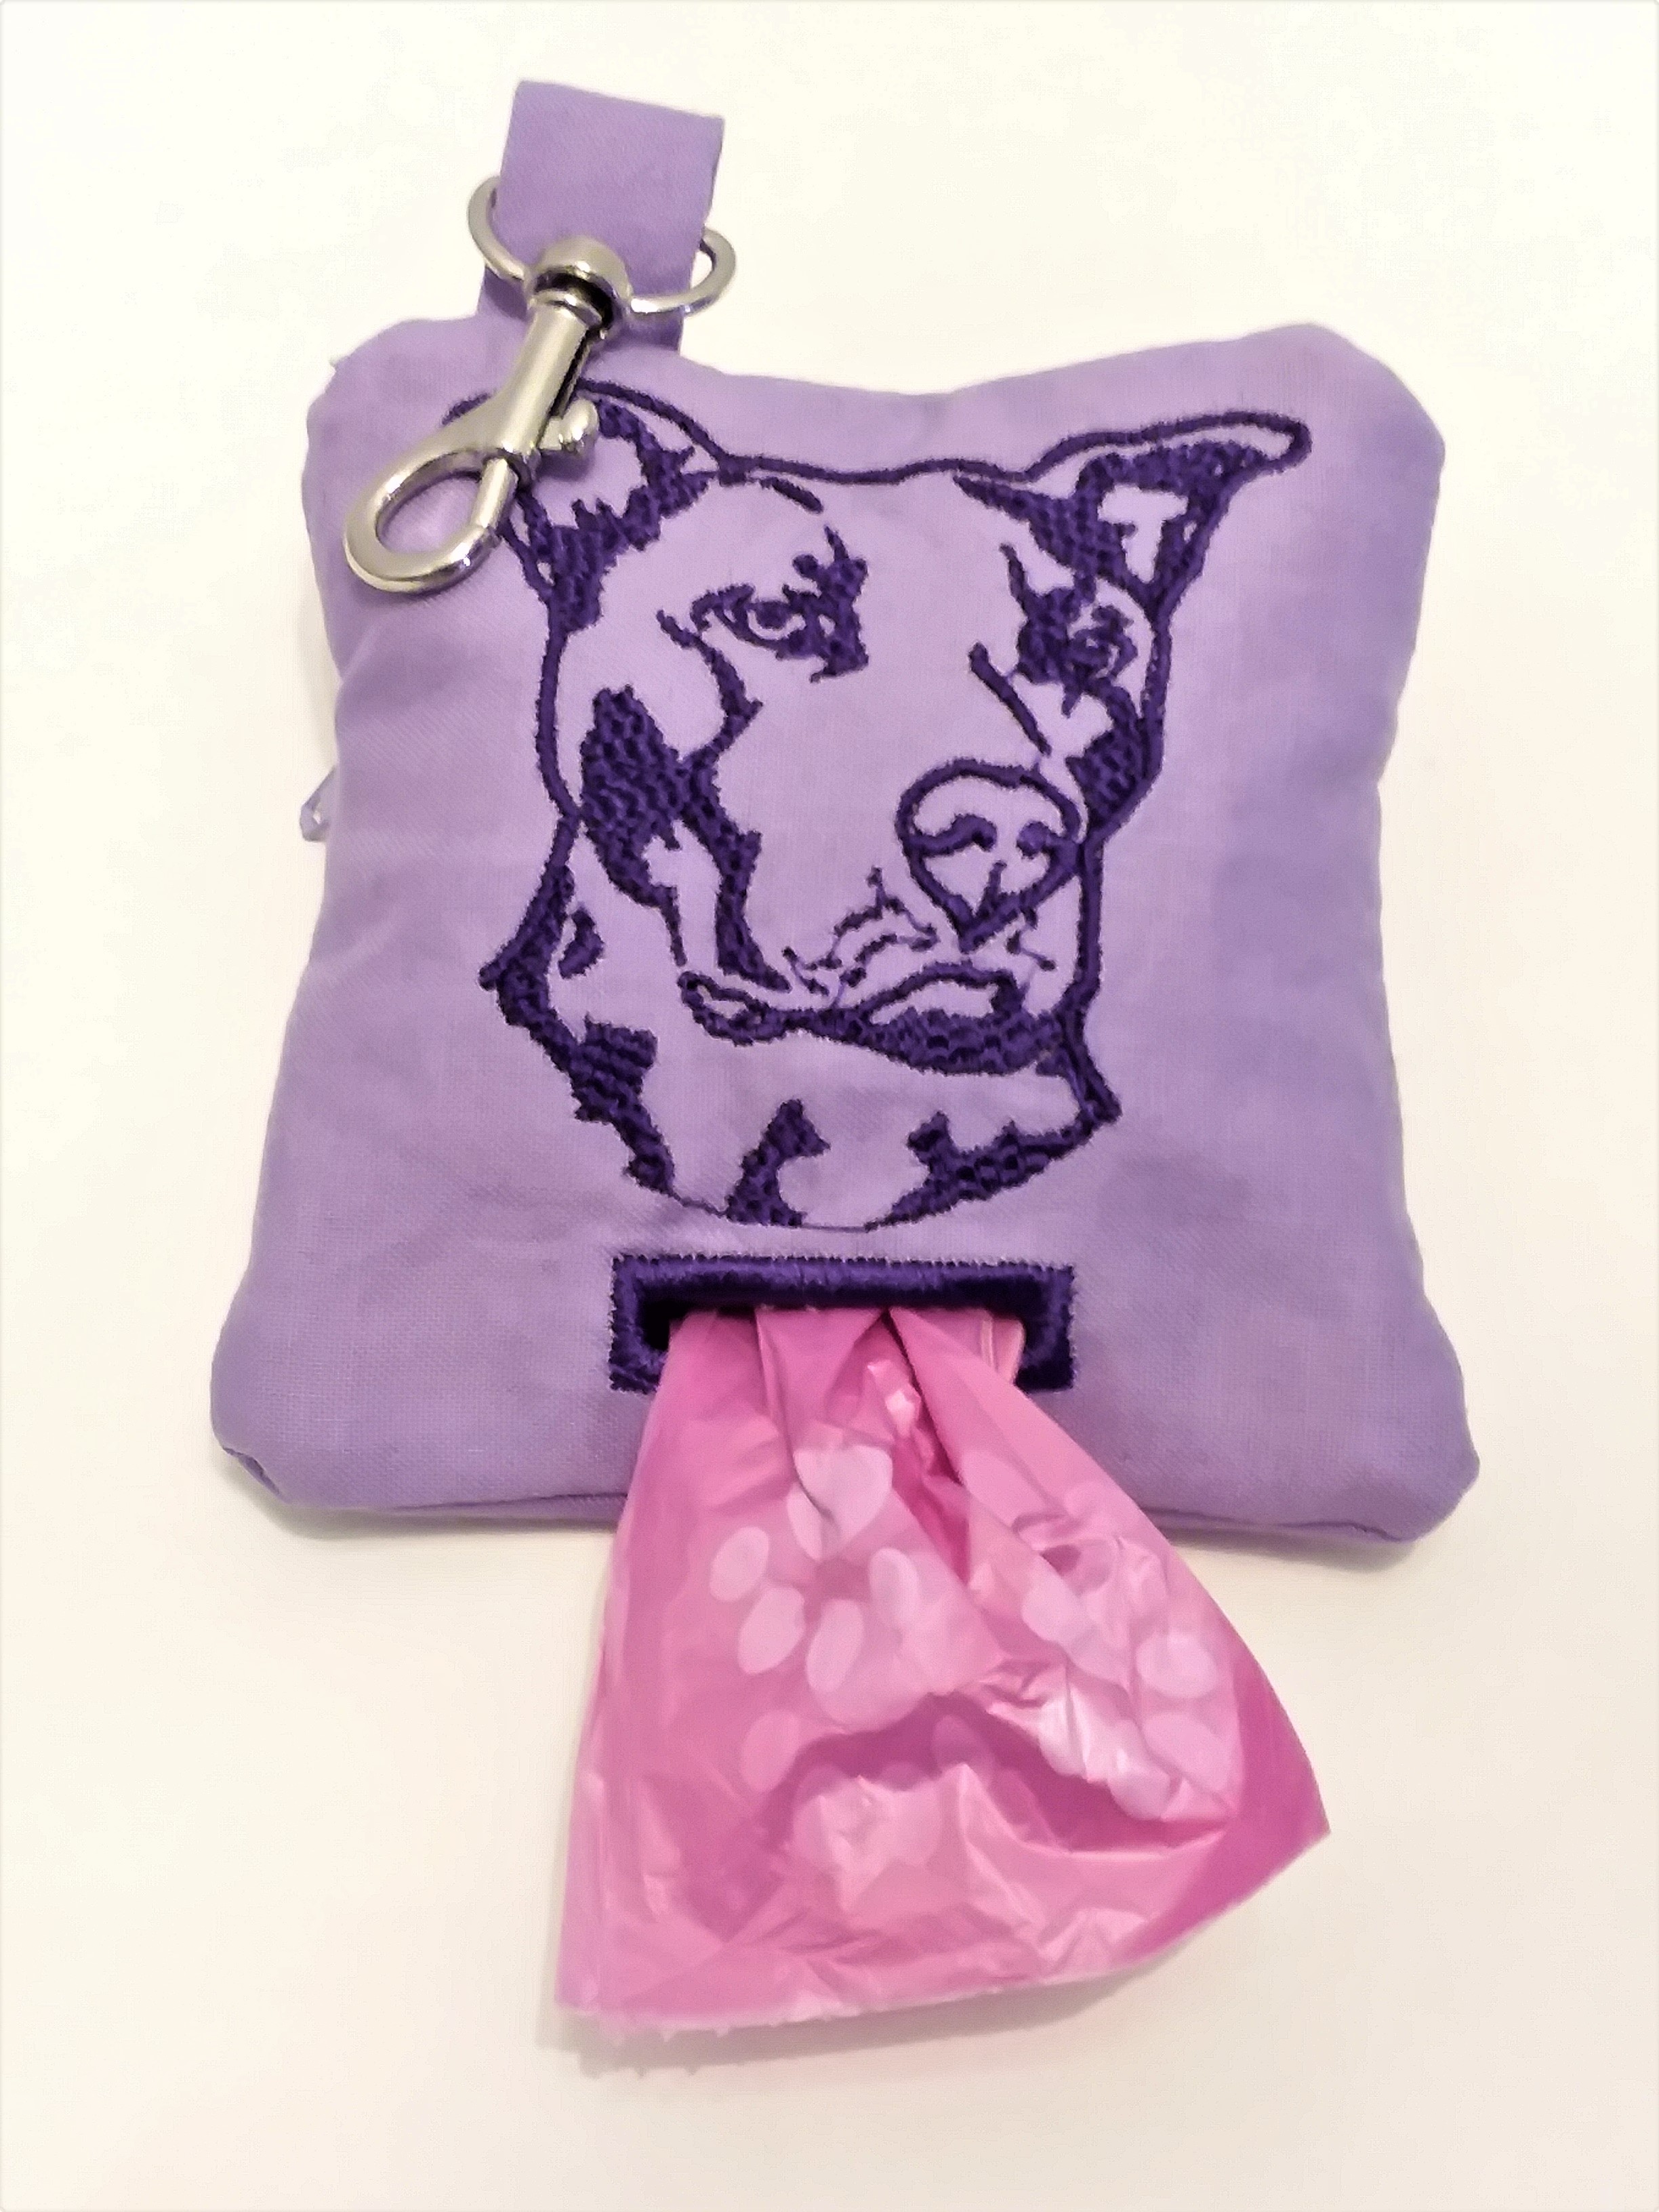 Dog poop bag holder with embroidered pit bull and bag opening. Free roll of bags . Handmade by A fur baby favorite in  the USA